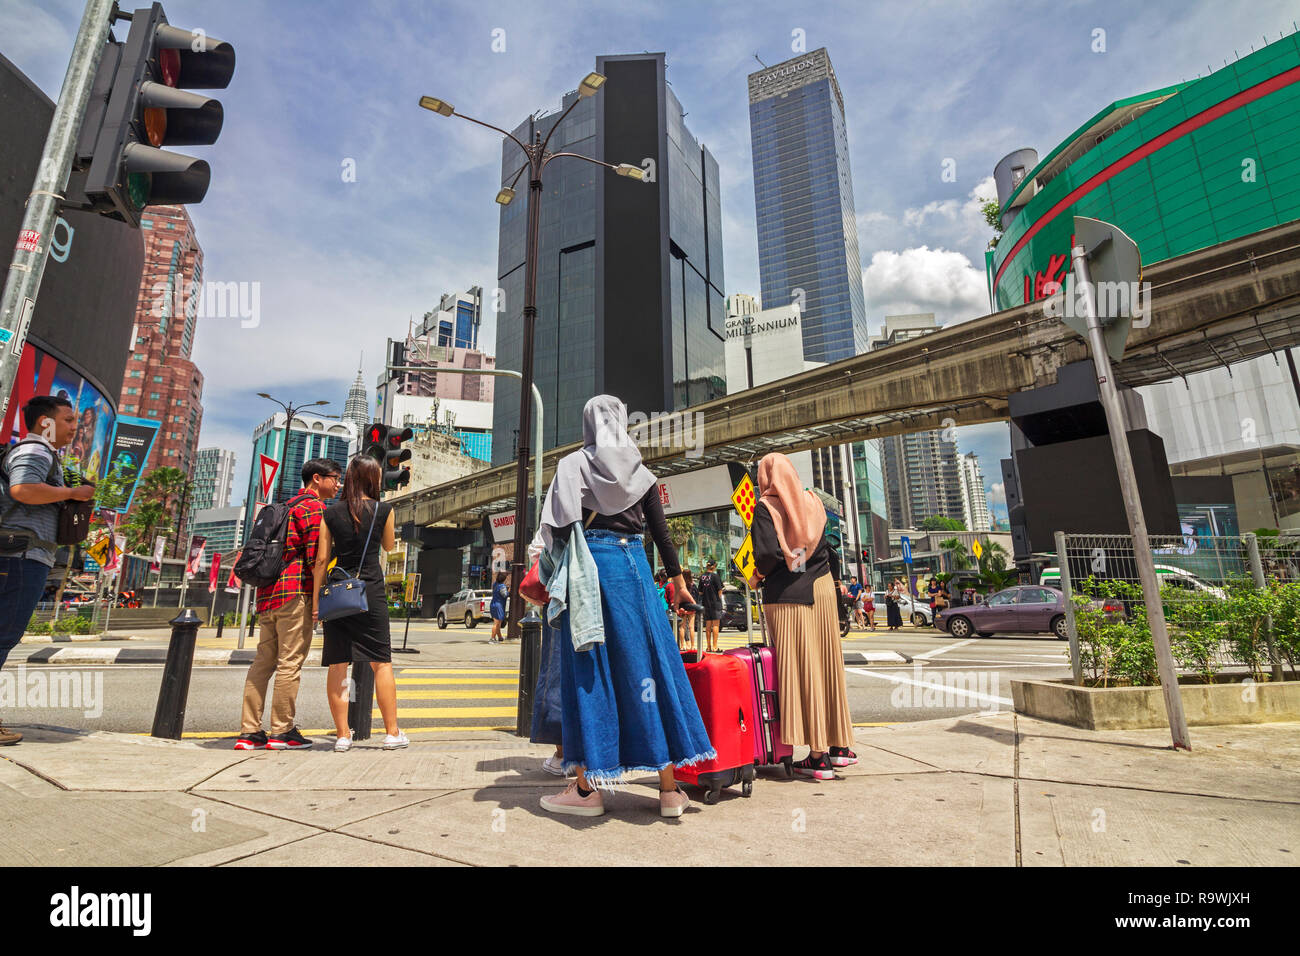 Kuala Lumpur, Malaysia Nov 10 2018 - Muslim Tourist with hijab carrying luggage waiting at the traffic light of famous junction of the shopping distri Stock Photo